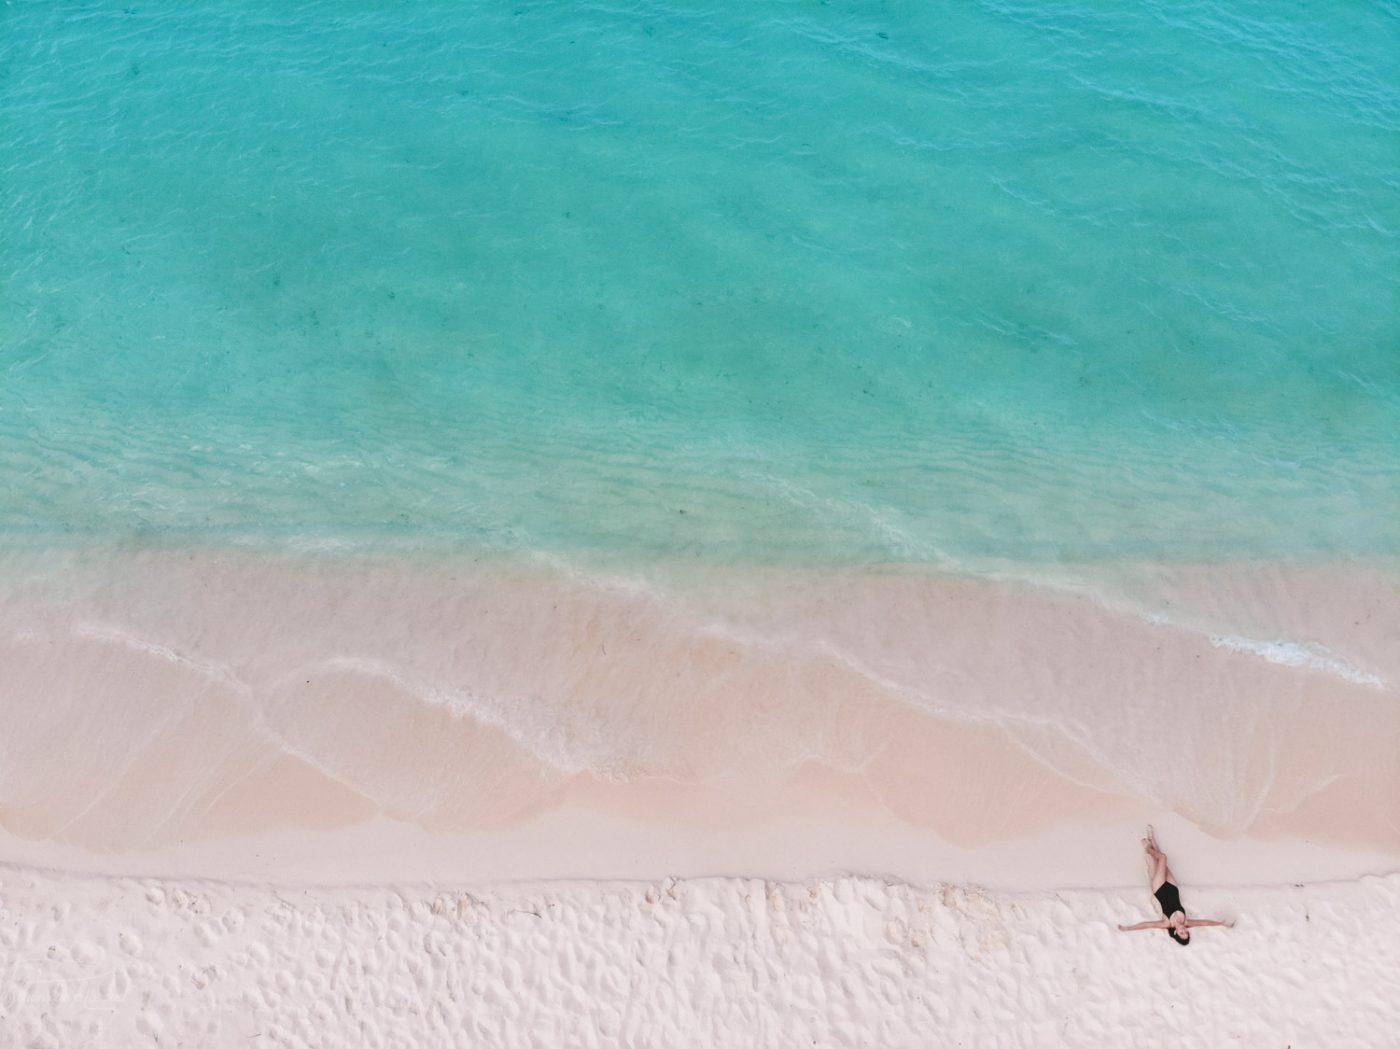 A person lying down on the pristine sand by the turquoise blue water of Bahia de las Aguilas, one of the best places to visit in the Dominican Republic.